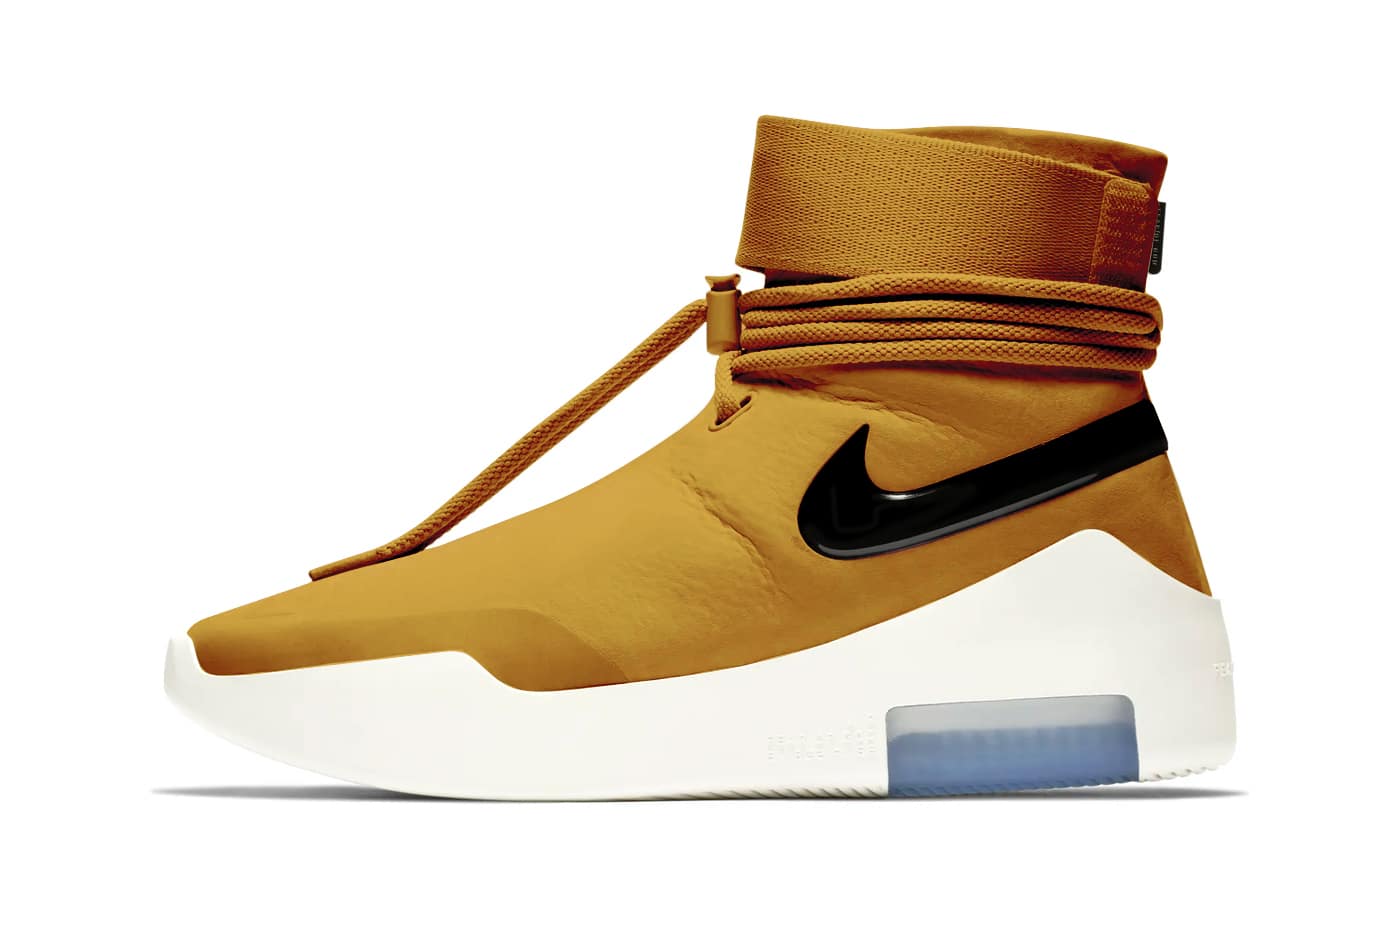 Nike Air Fear of God Shoot Around Wheat Gold